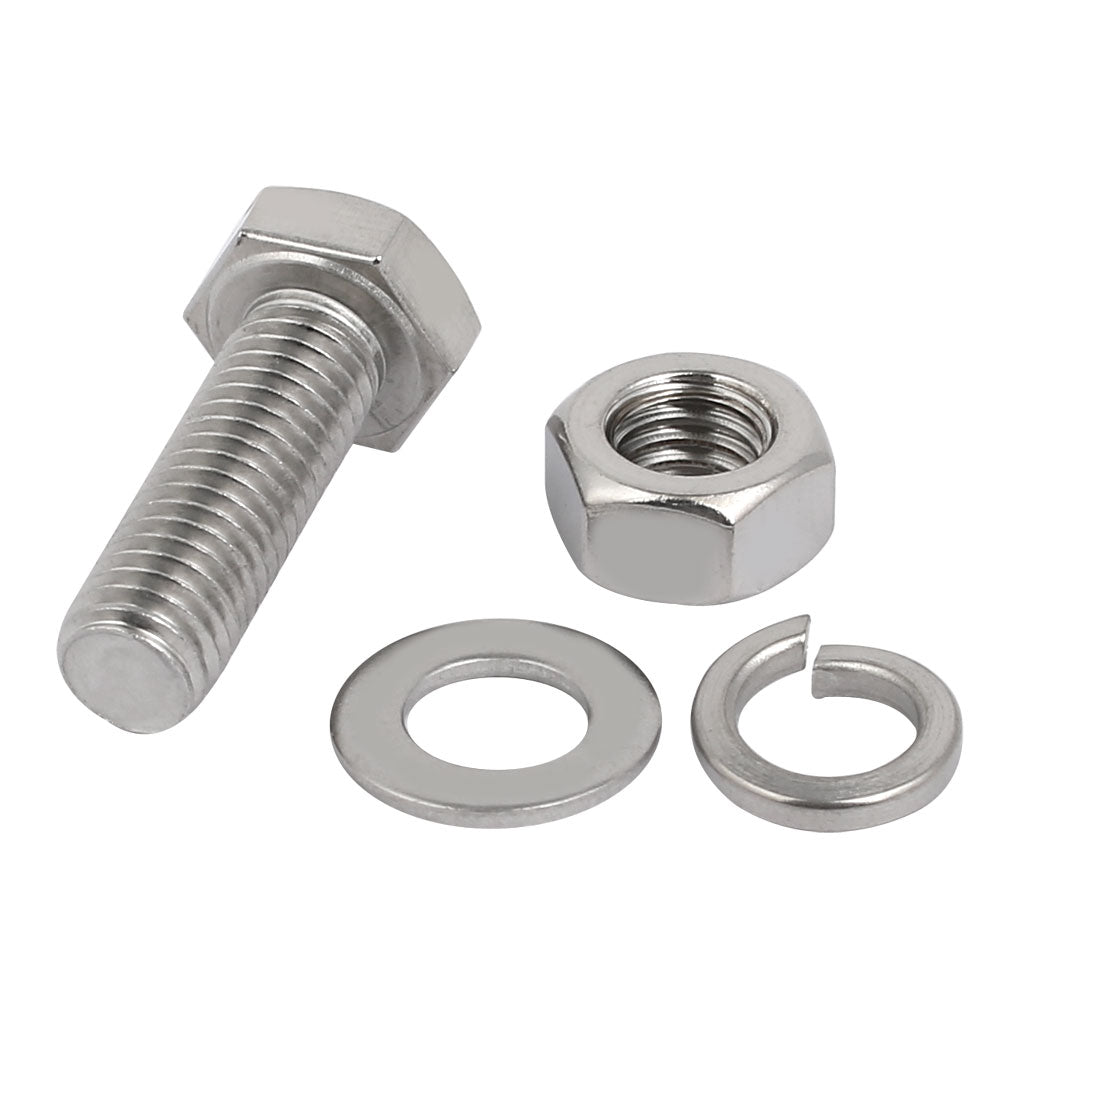 uxcell Uxcell 20 Set M8x25mm 304 Stainless Steel Hex Bolts w Nuts and Washers Assortment Kit